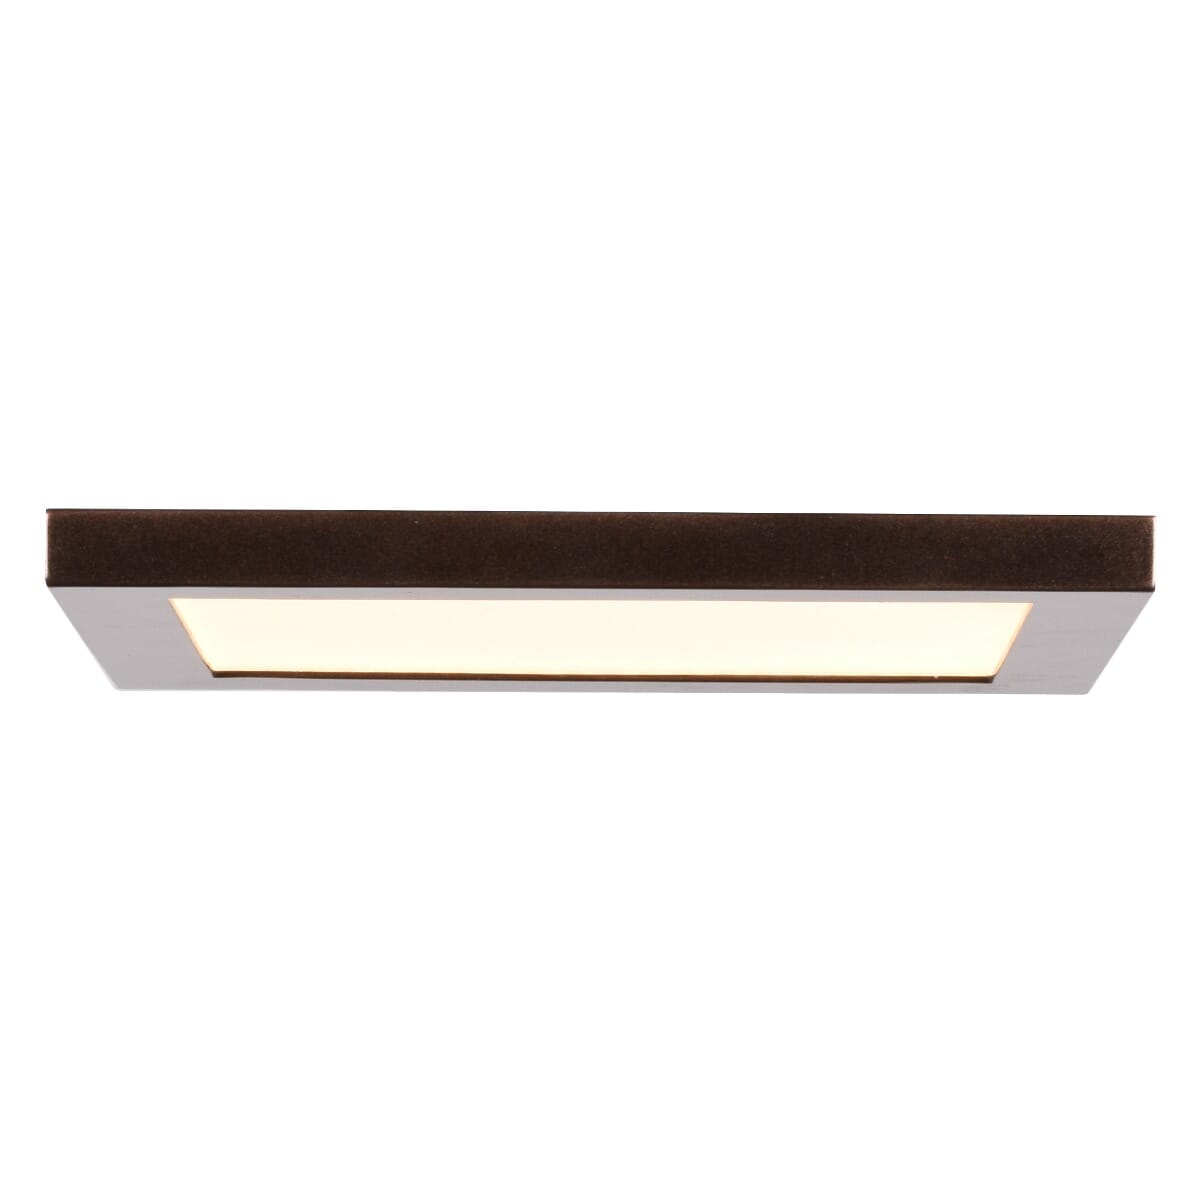 Access Boxer 6" Ceiling Light in Bronze